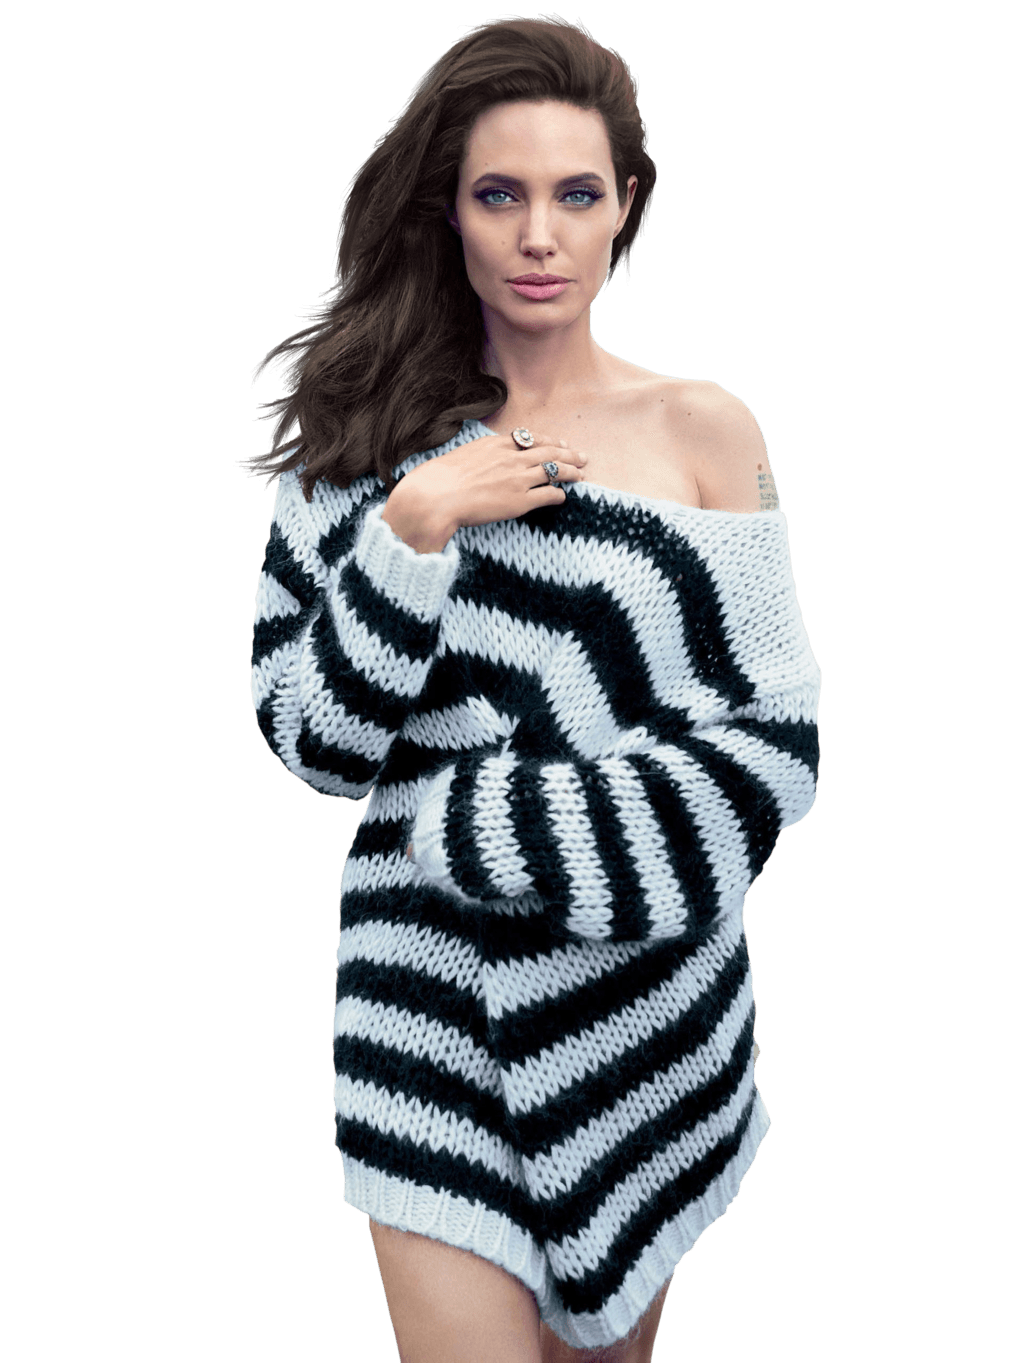 Angelina Jolie Png Image - Angelina Jolie, Transparent background PNG HD thumbnail